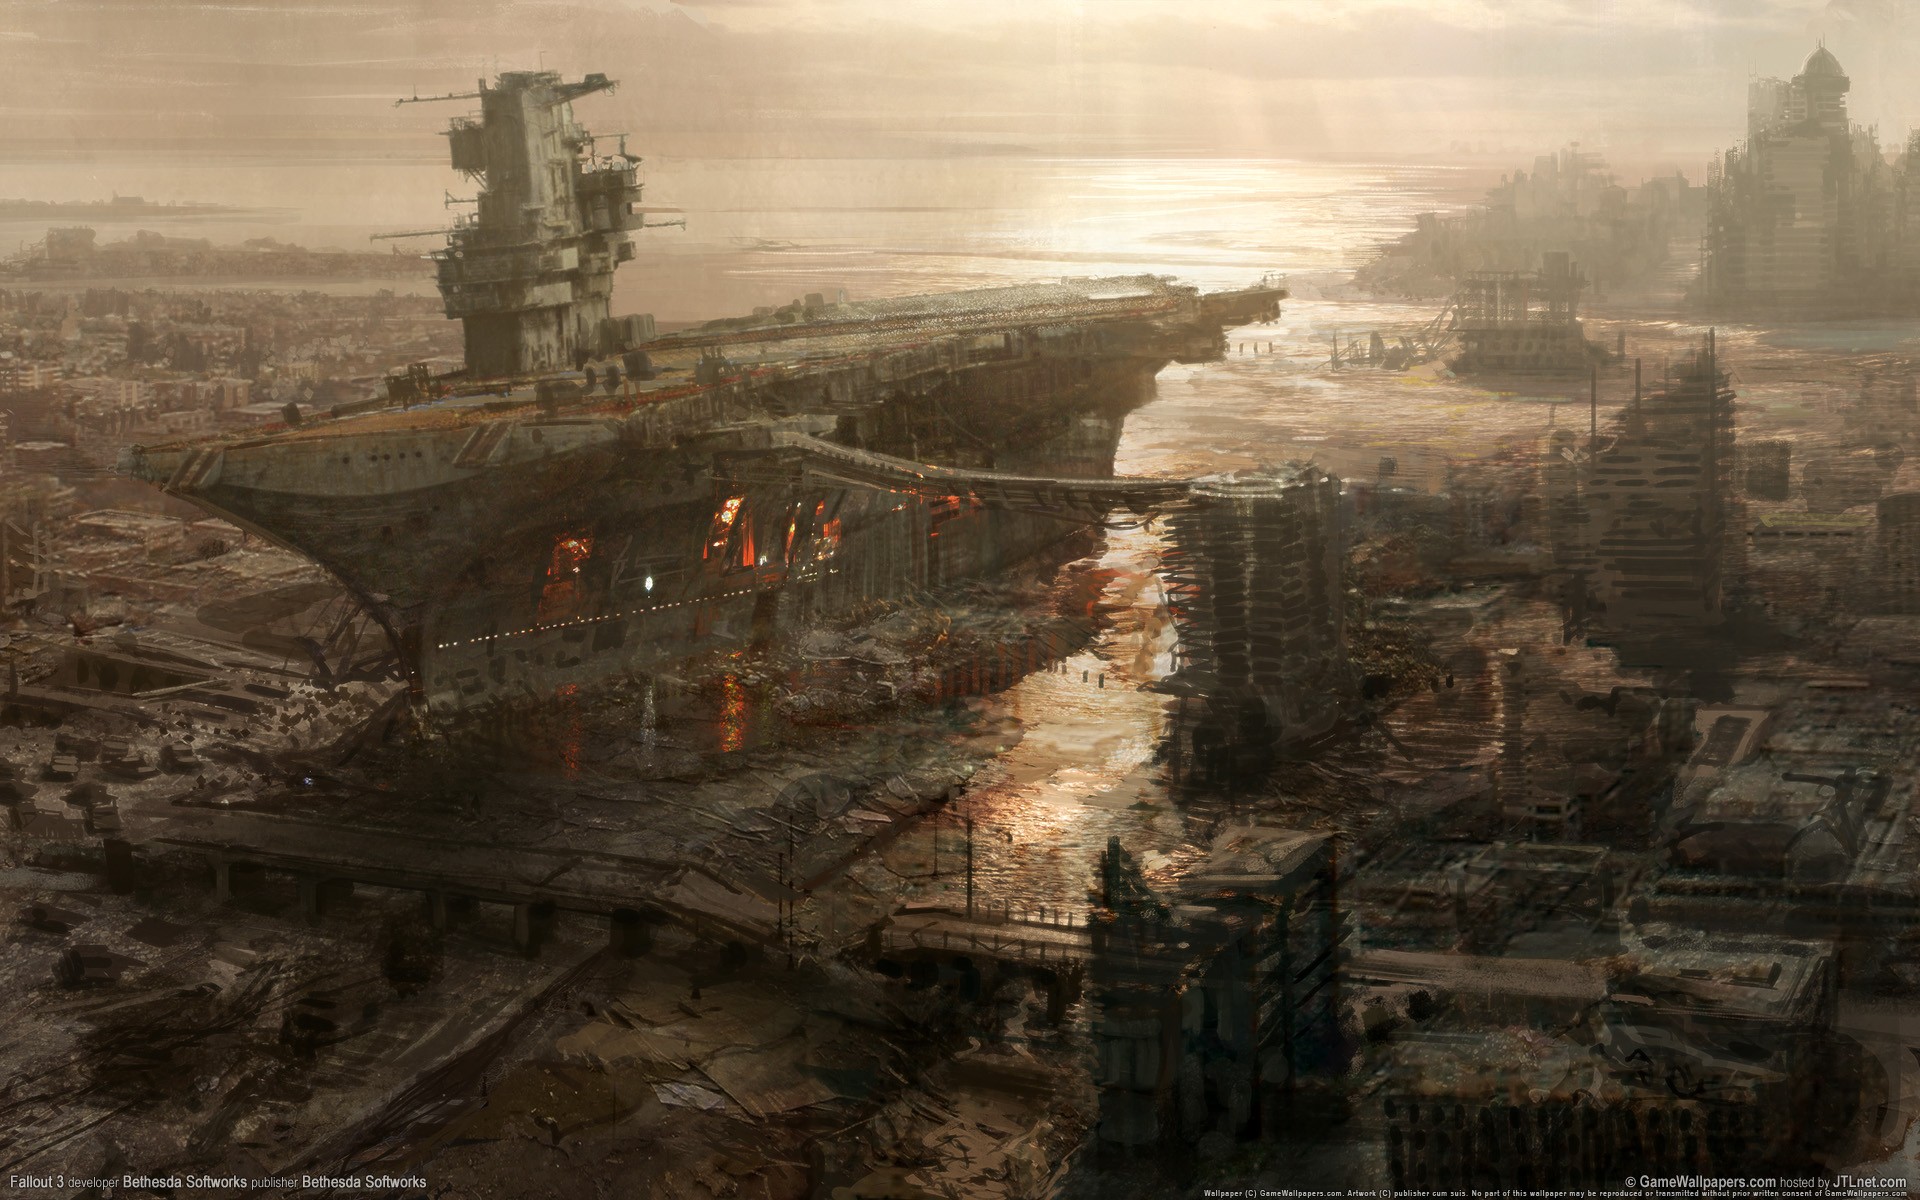 General 1920x1200 Fallout Fallout 3 apocalyptic video games PC gaming Bethesda Softworks aircraft carrier wreck ruins science fiction futuristic video game art